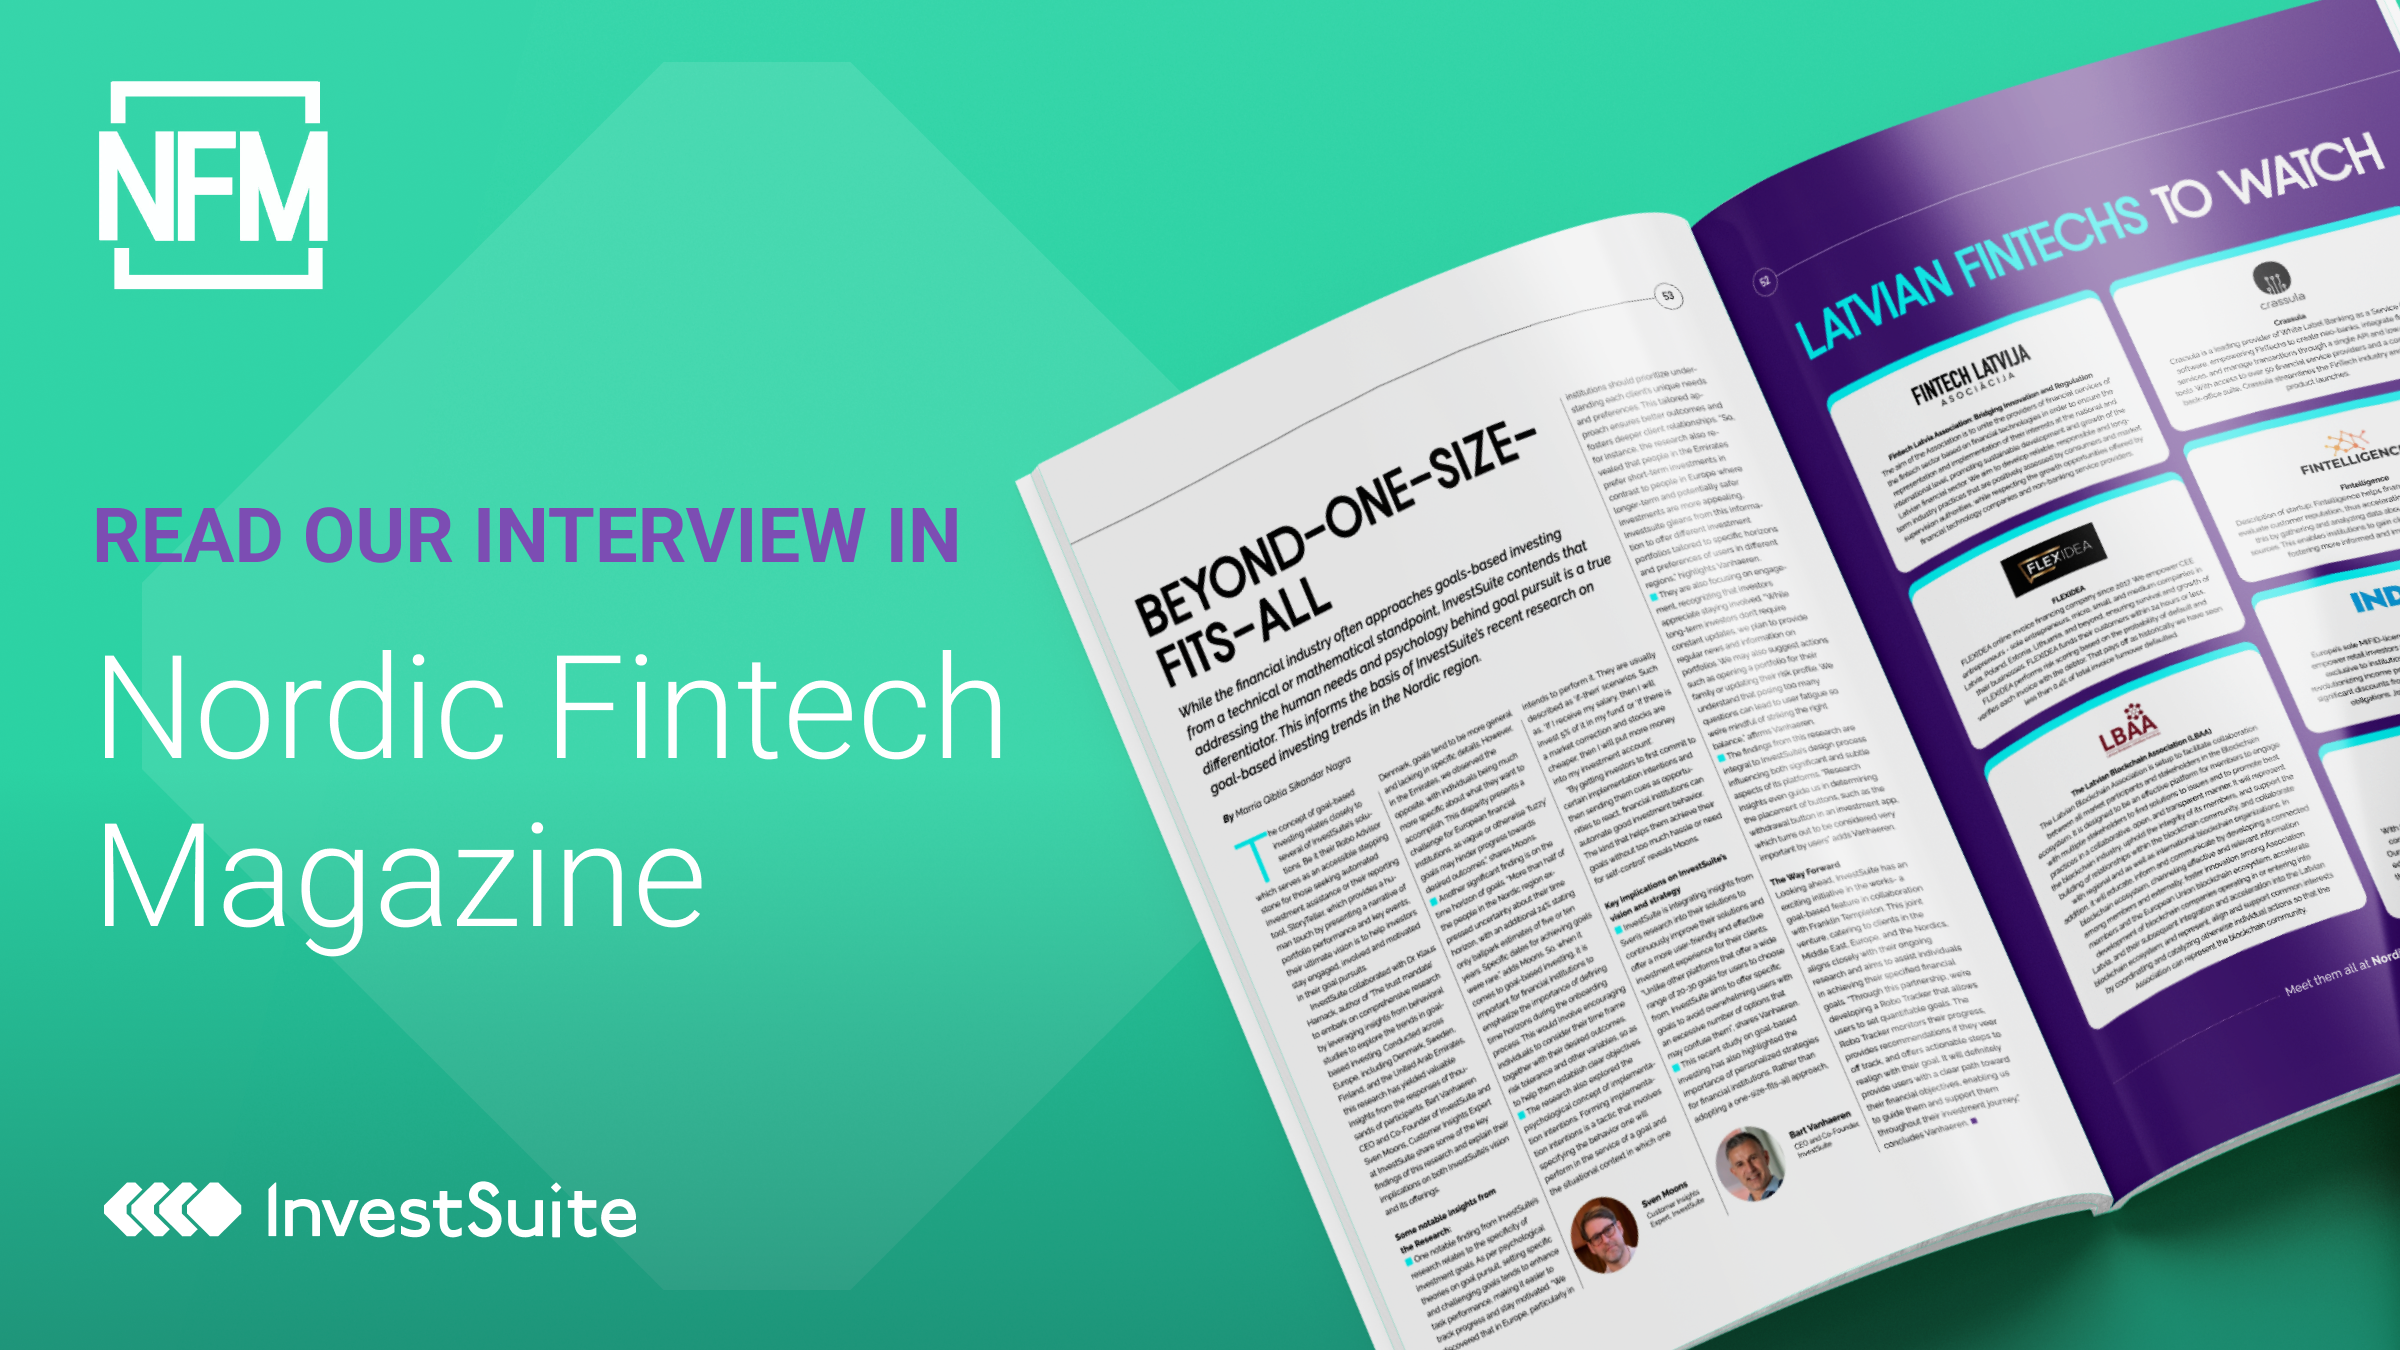 Read our interview in Nordic FinTech Magazine.